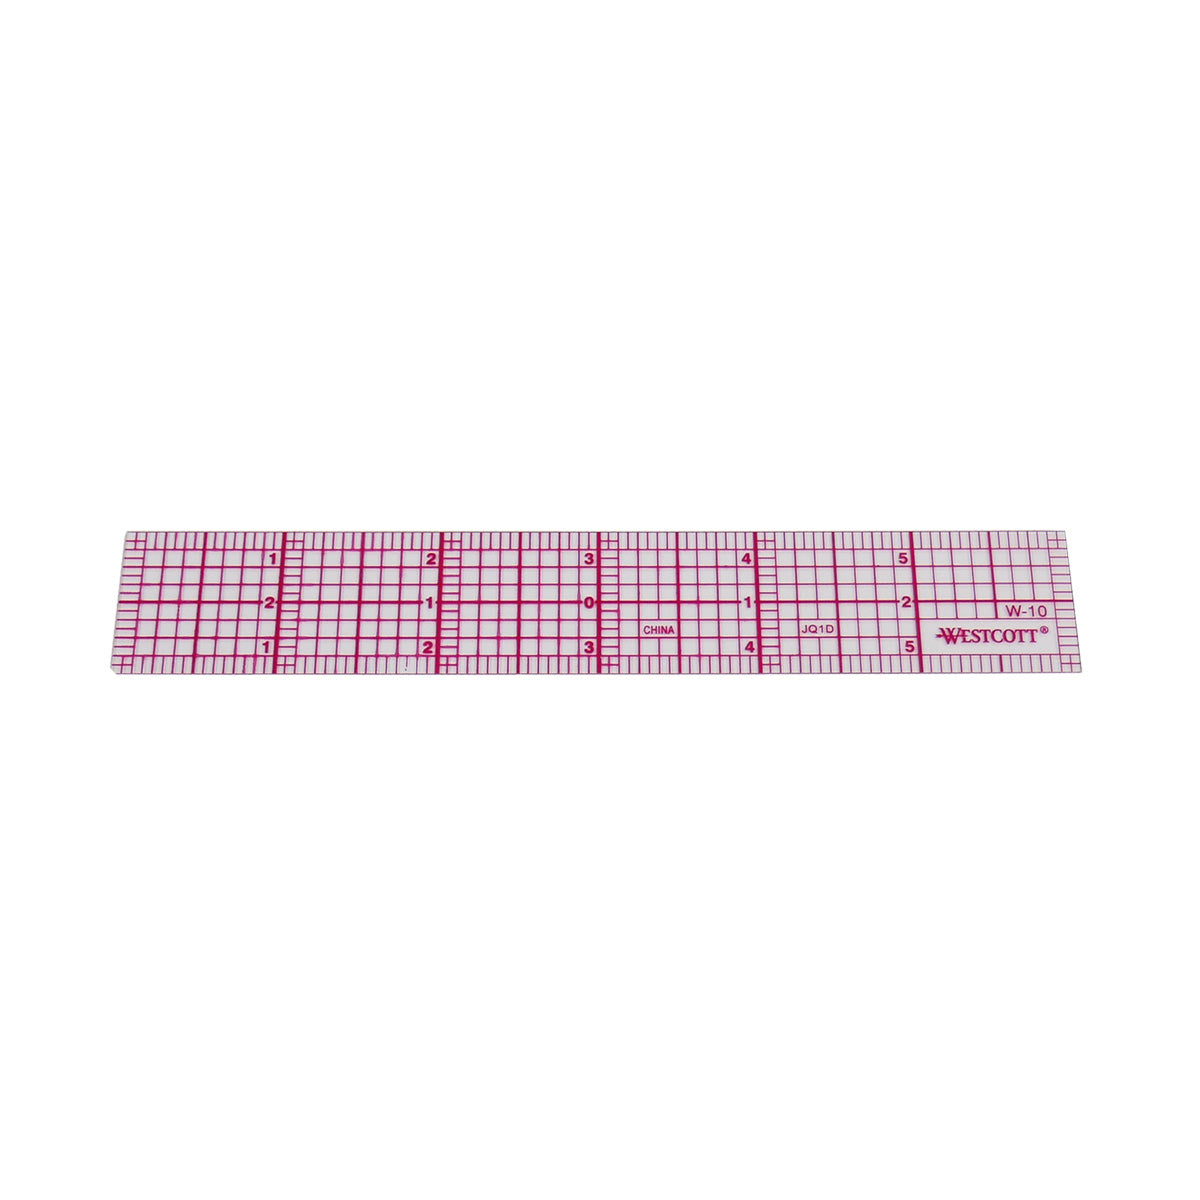 6" Westcott-branded transparent ruler without packaging, image taken at a slight angle.